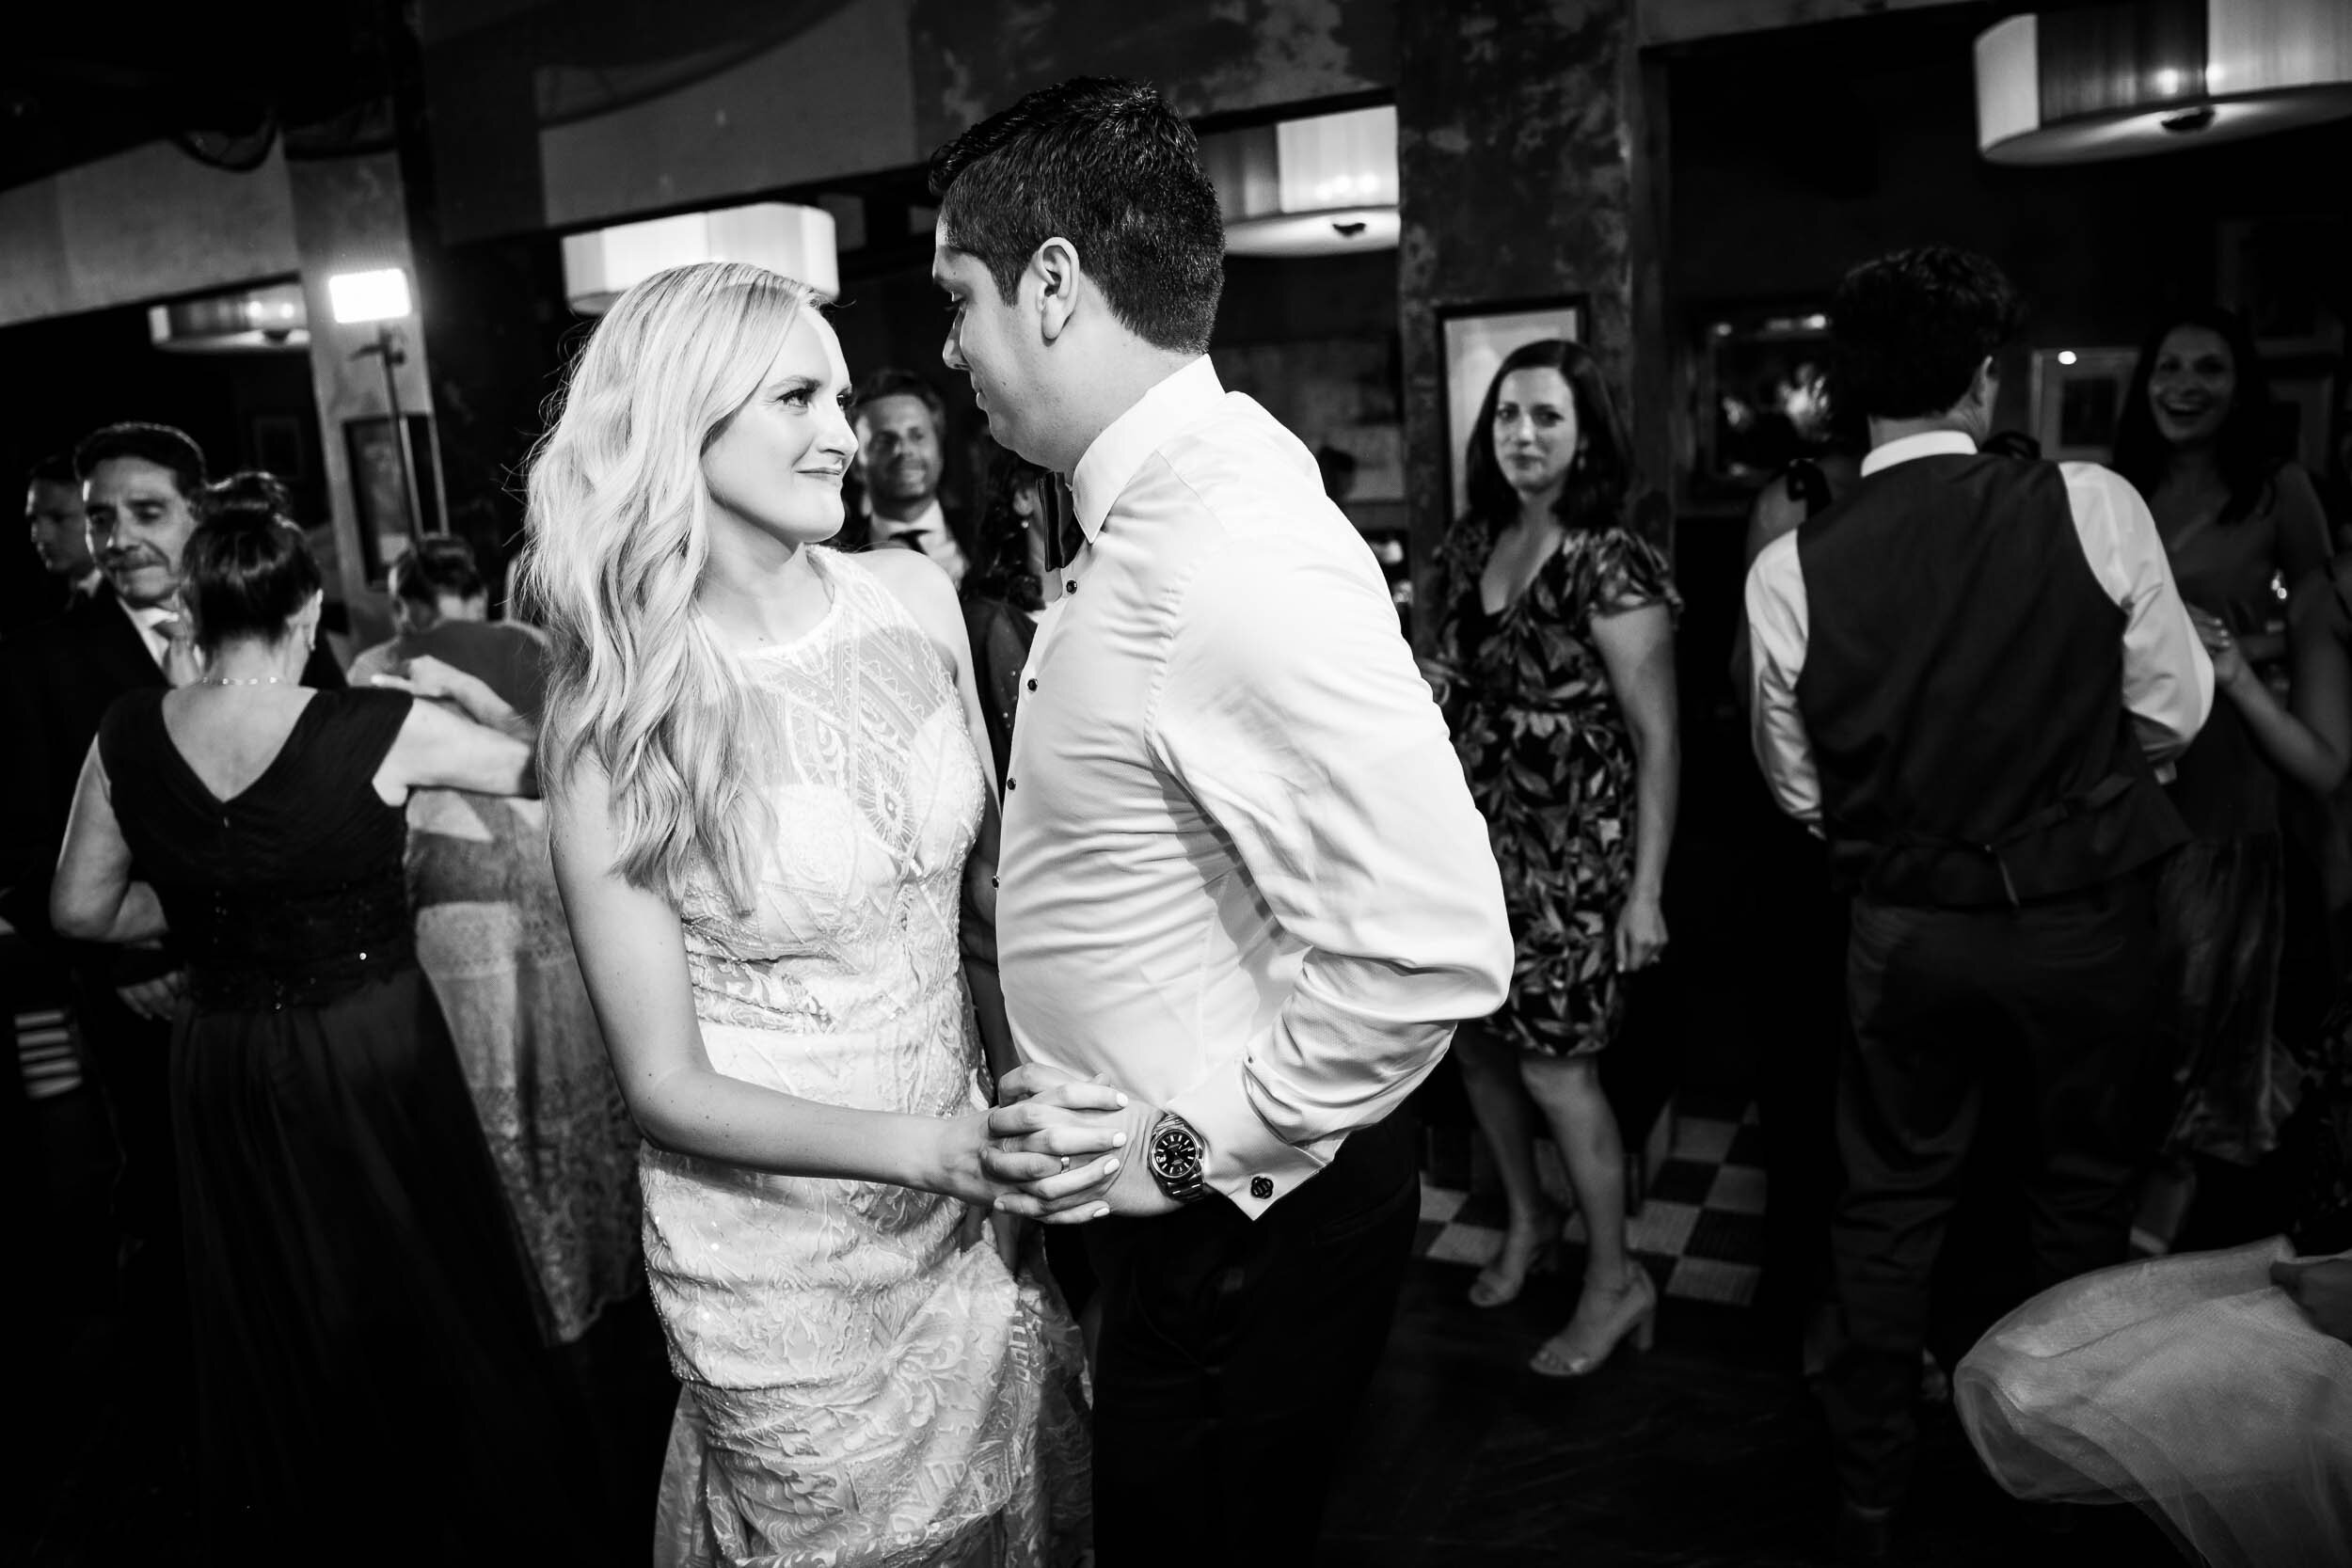 Carnivale Chicago Wedding captured by J. Brown PhotographyWedding dancing: Carnivale Chicago Wedding captured by J. Brown Photography